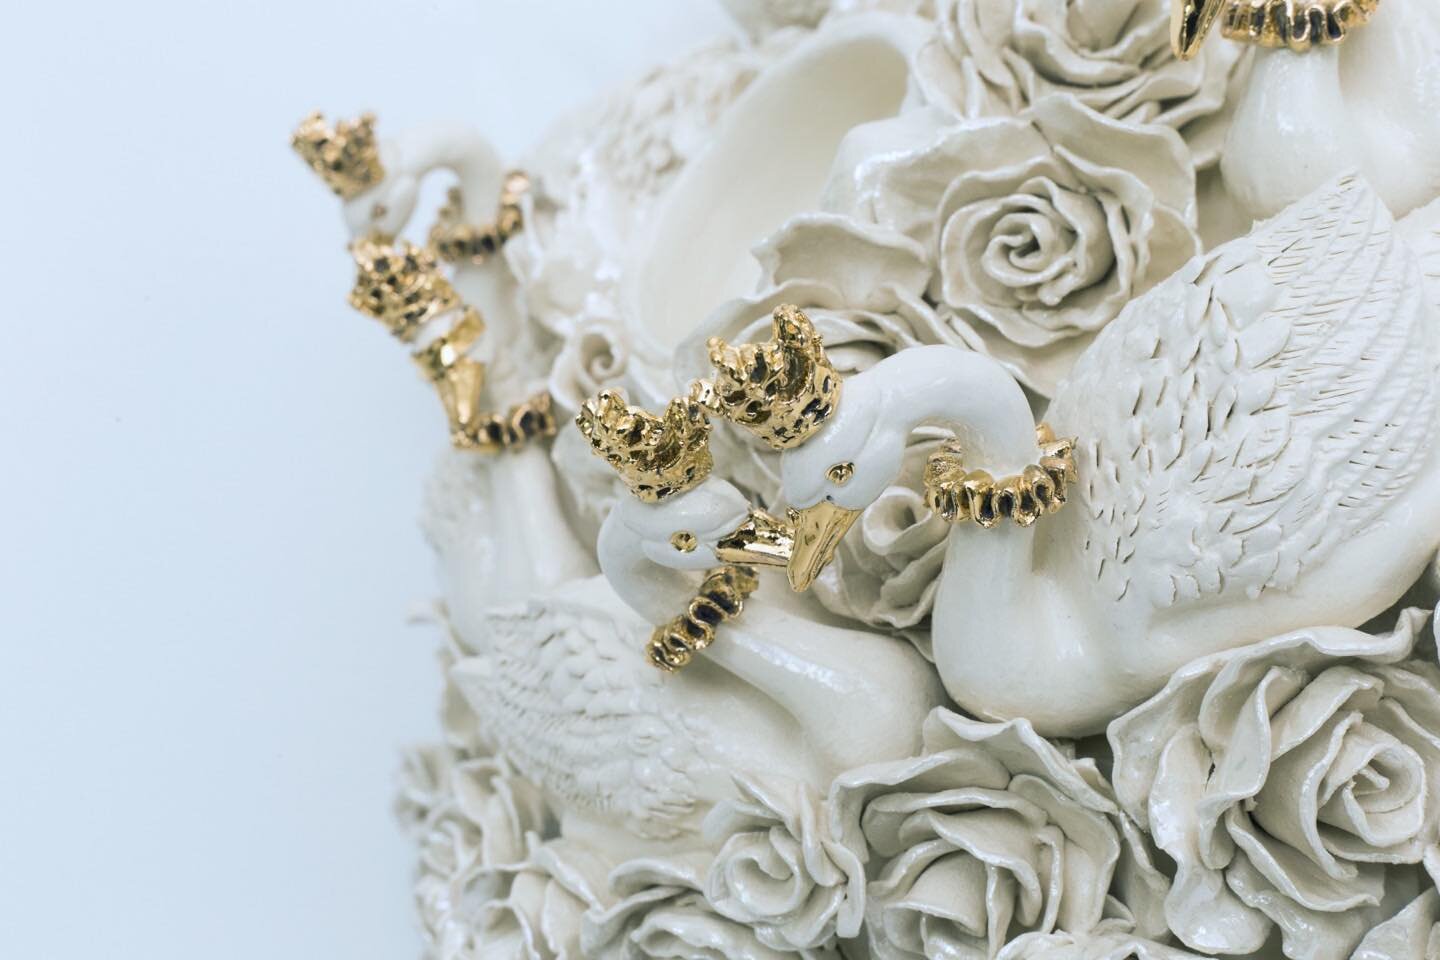 Detail of swans from CROWN OF SWANS sculpture I built for my &ldquo;Lucid Dreams&rdquo; exhibition @Newzones Gallery #susannahmontague